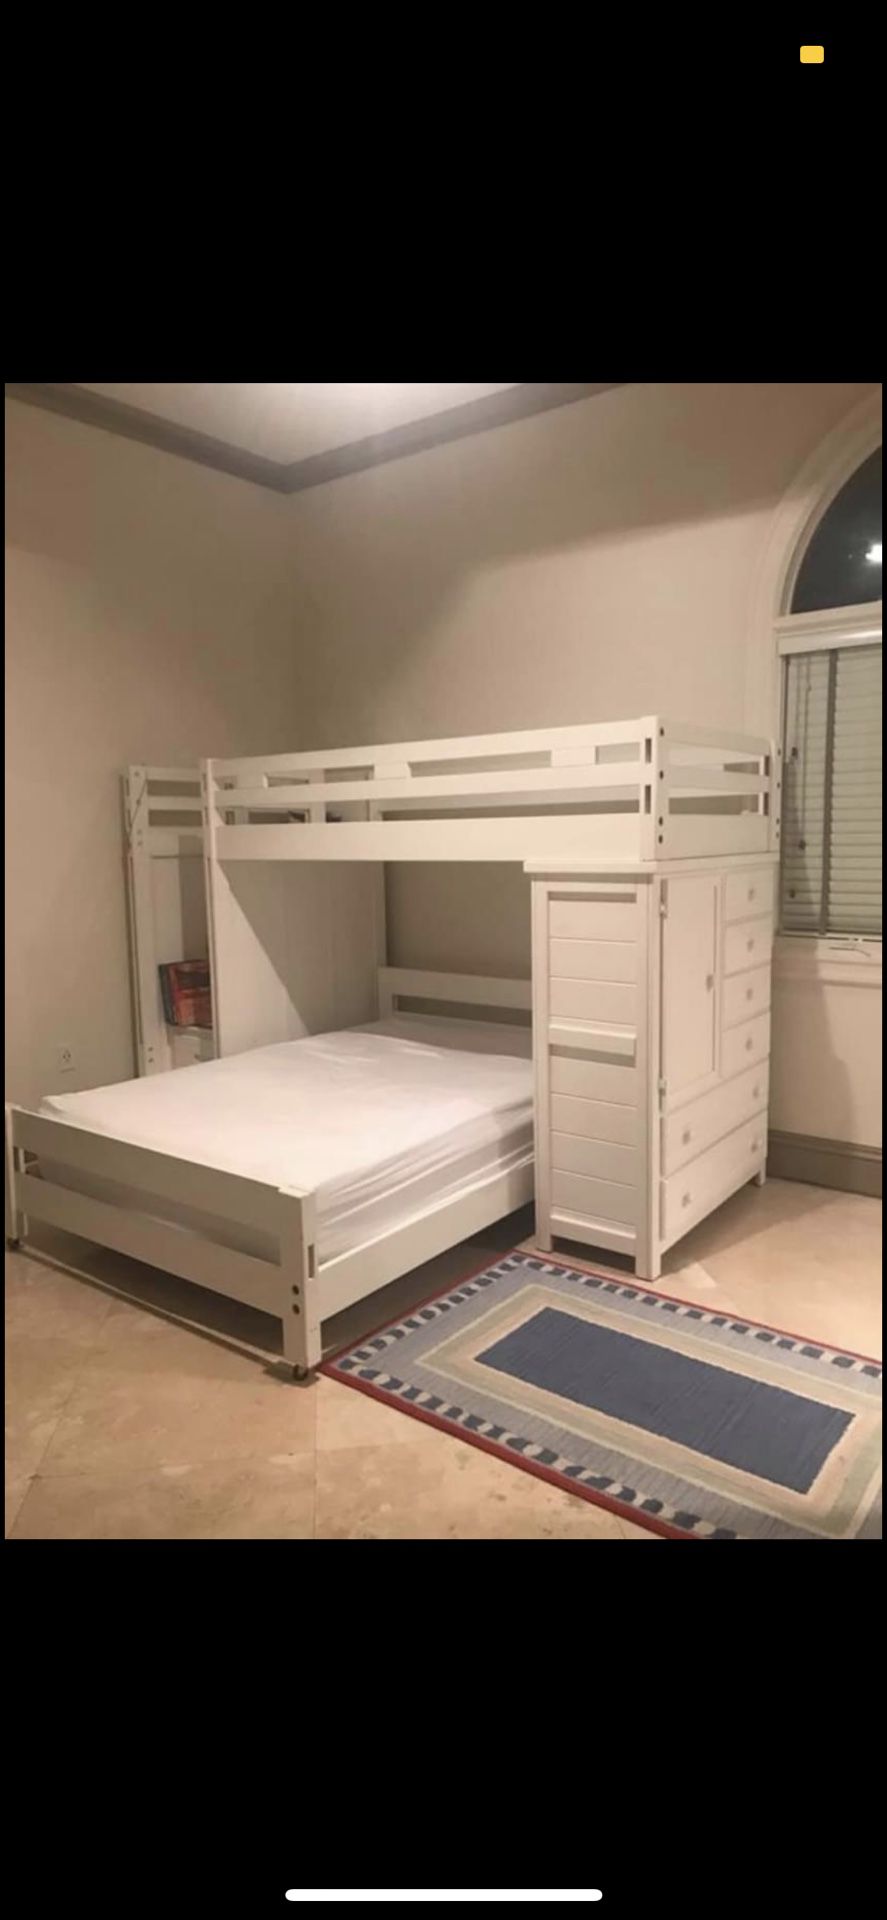 Bunkbed | Rooms To Go | Write if interested!